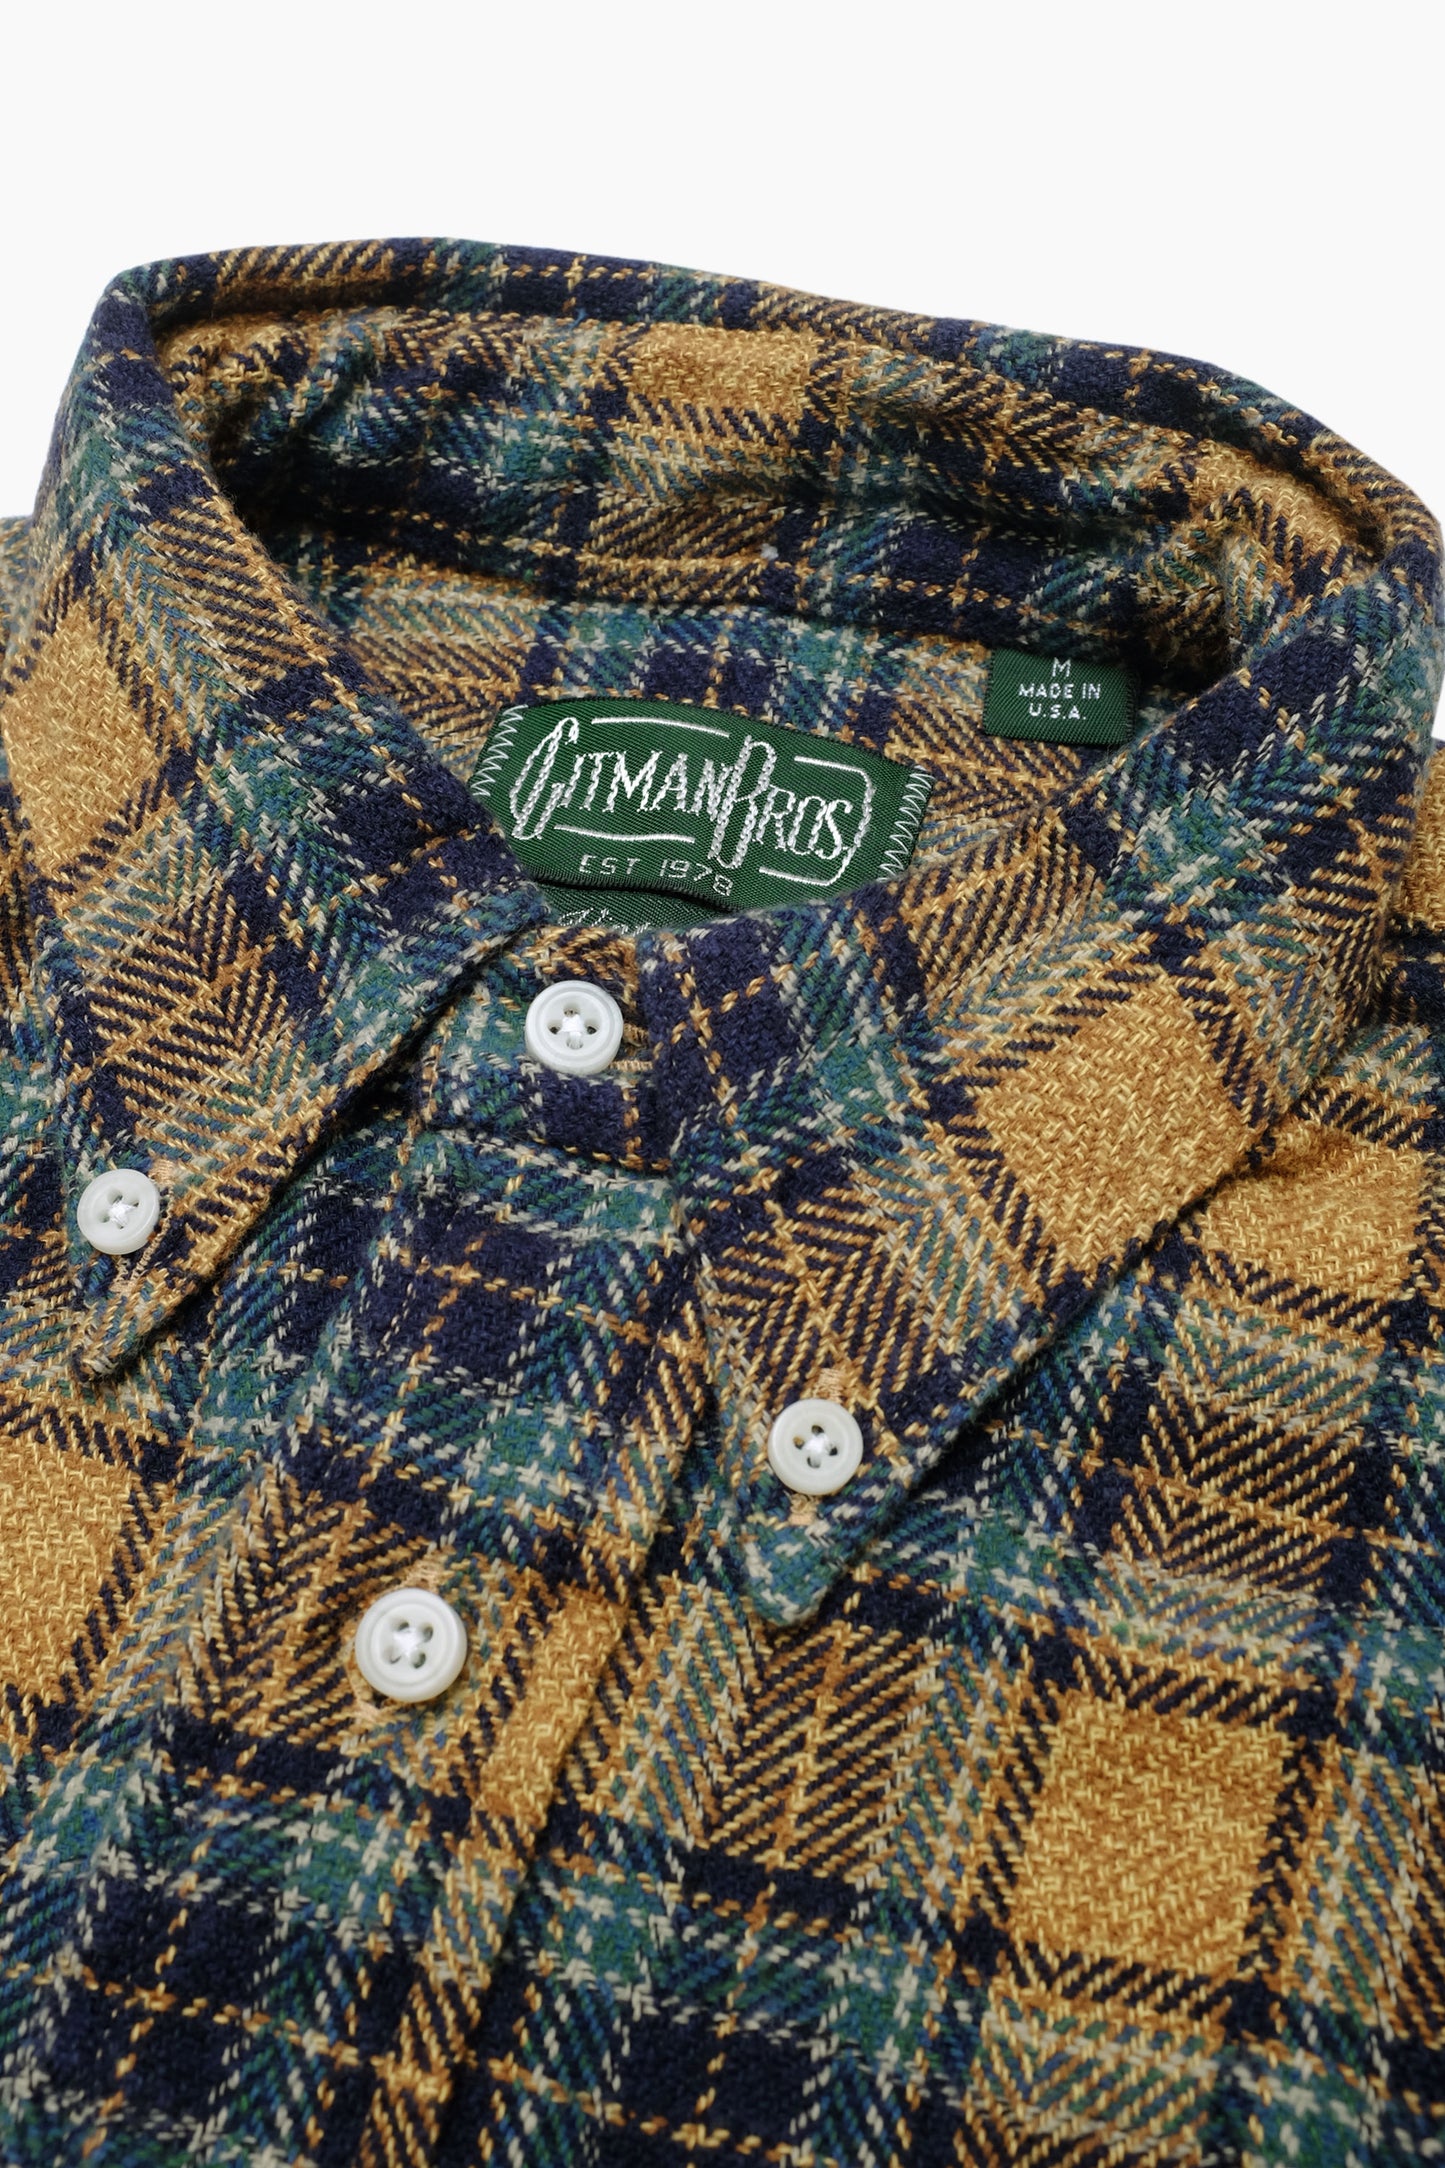 Checked tweed flannel shirt - Yellow